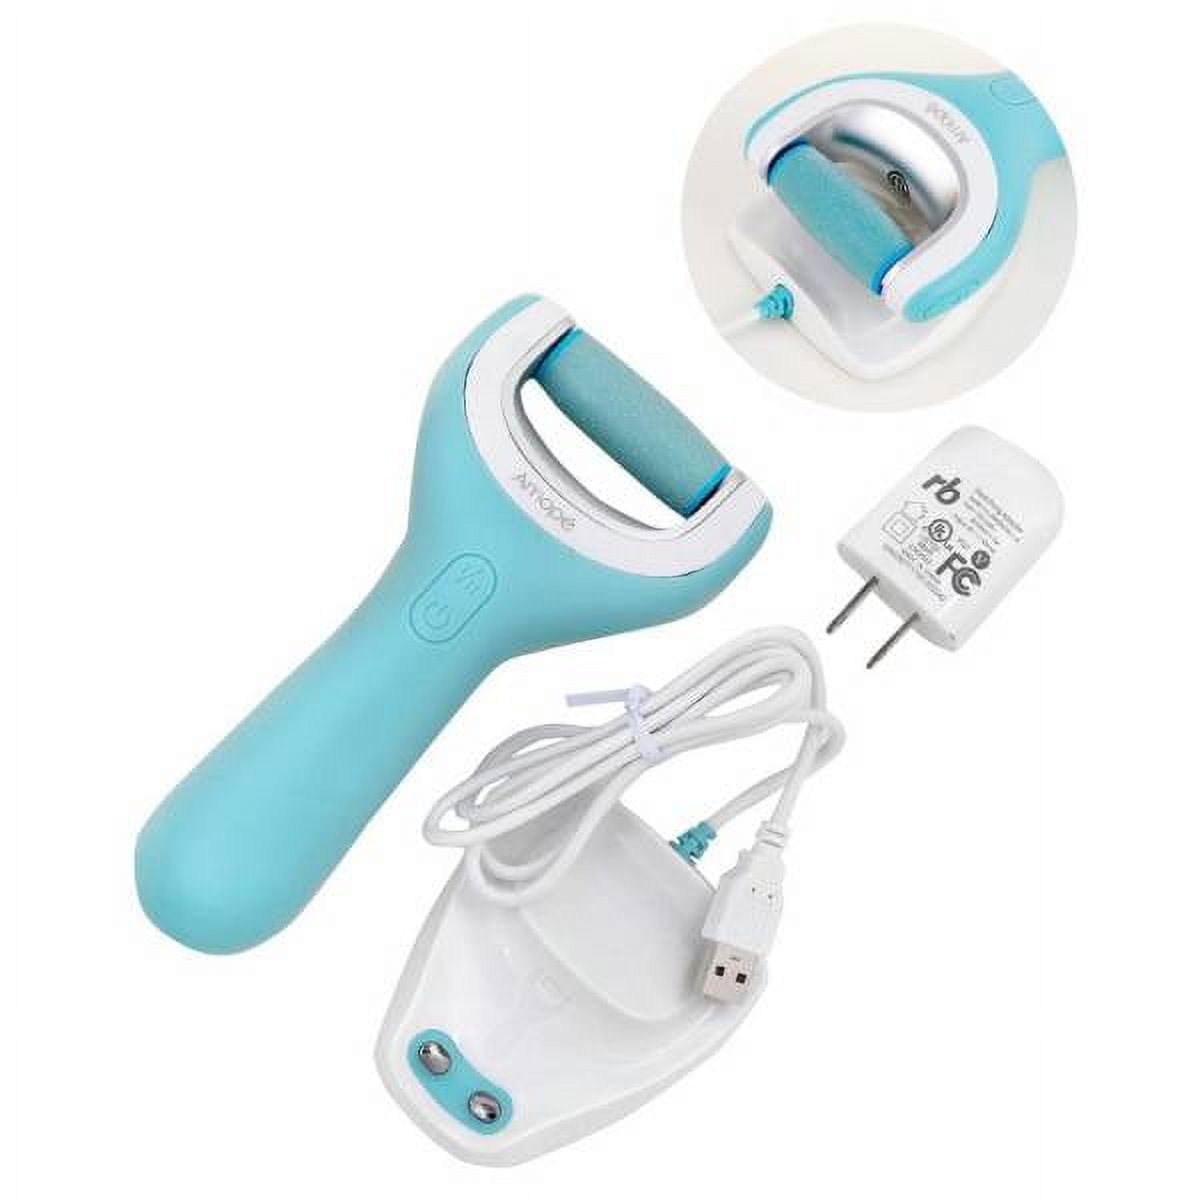 Amopé Pedi Perfect Spa Experience Pampering Pack Wet Dry Electronic Fo –  MZR Trading